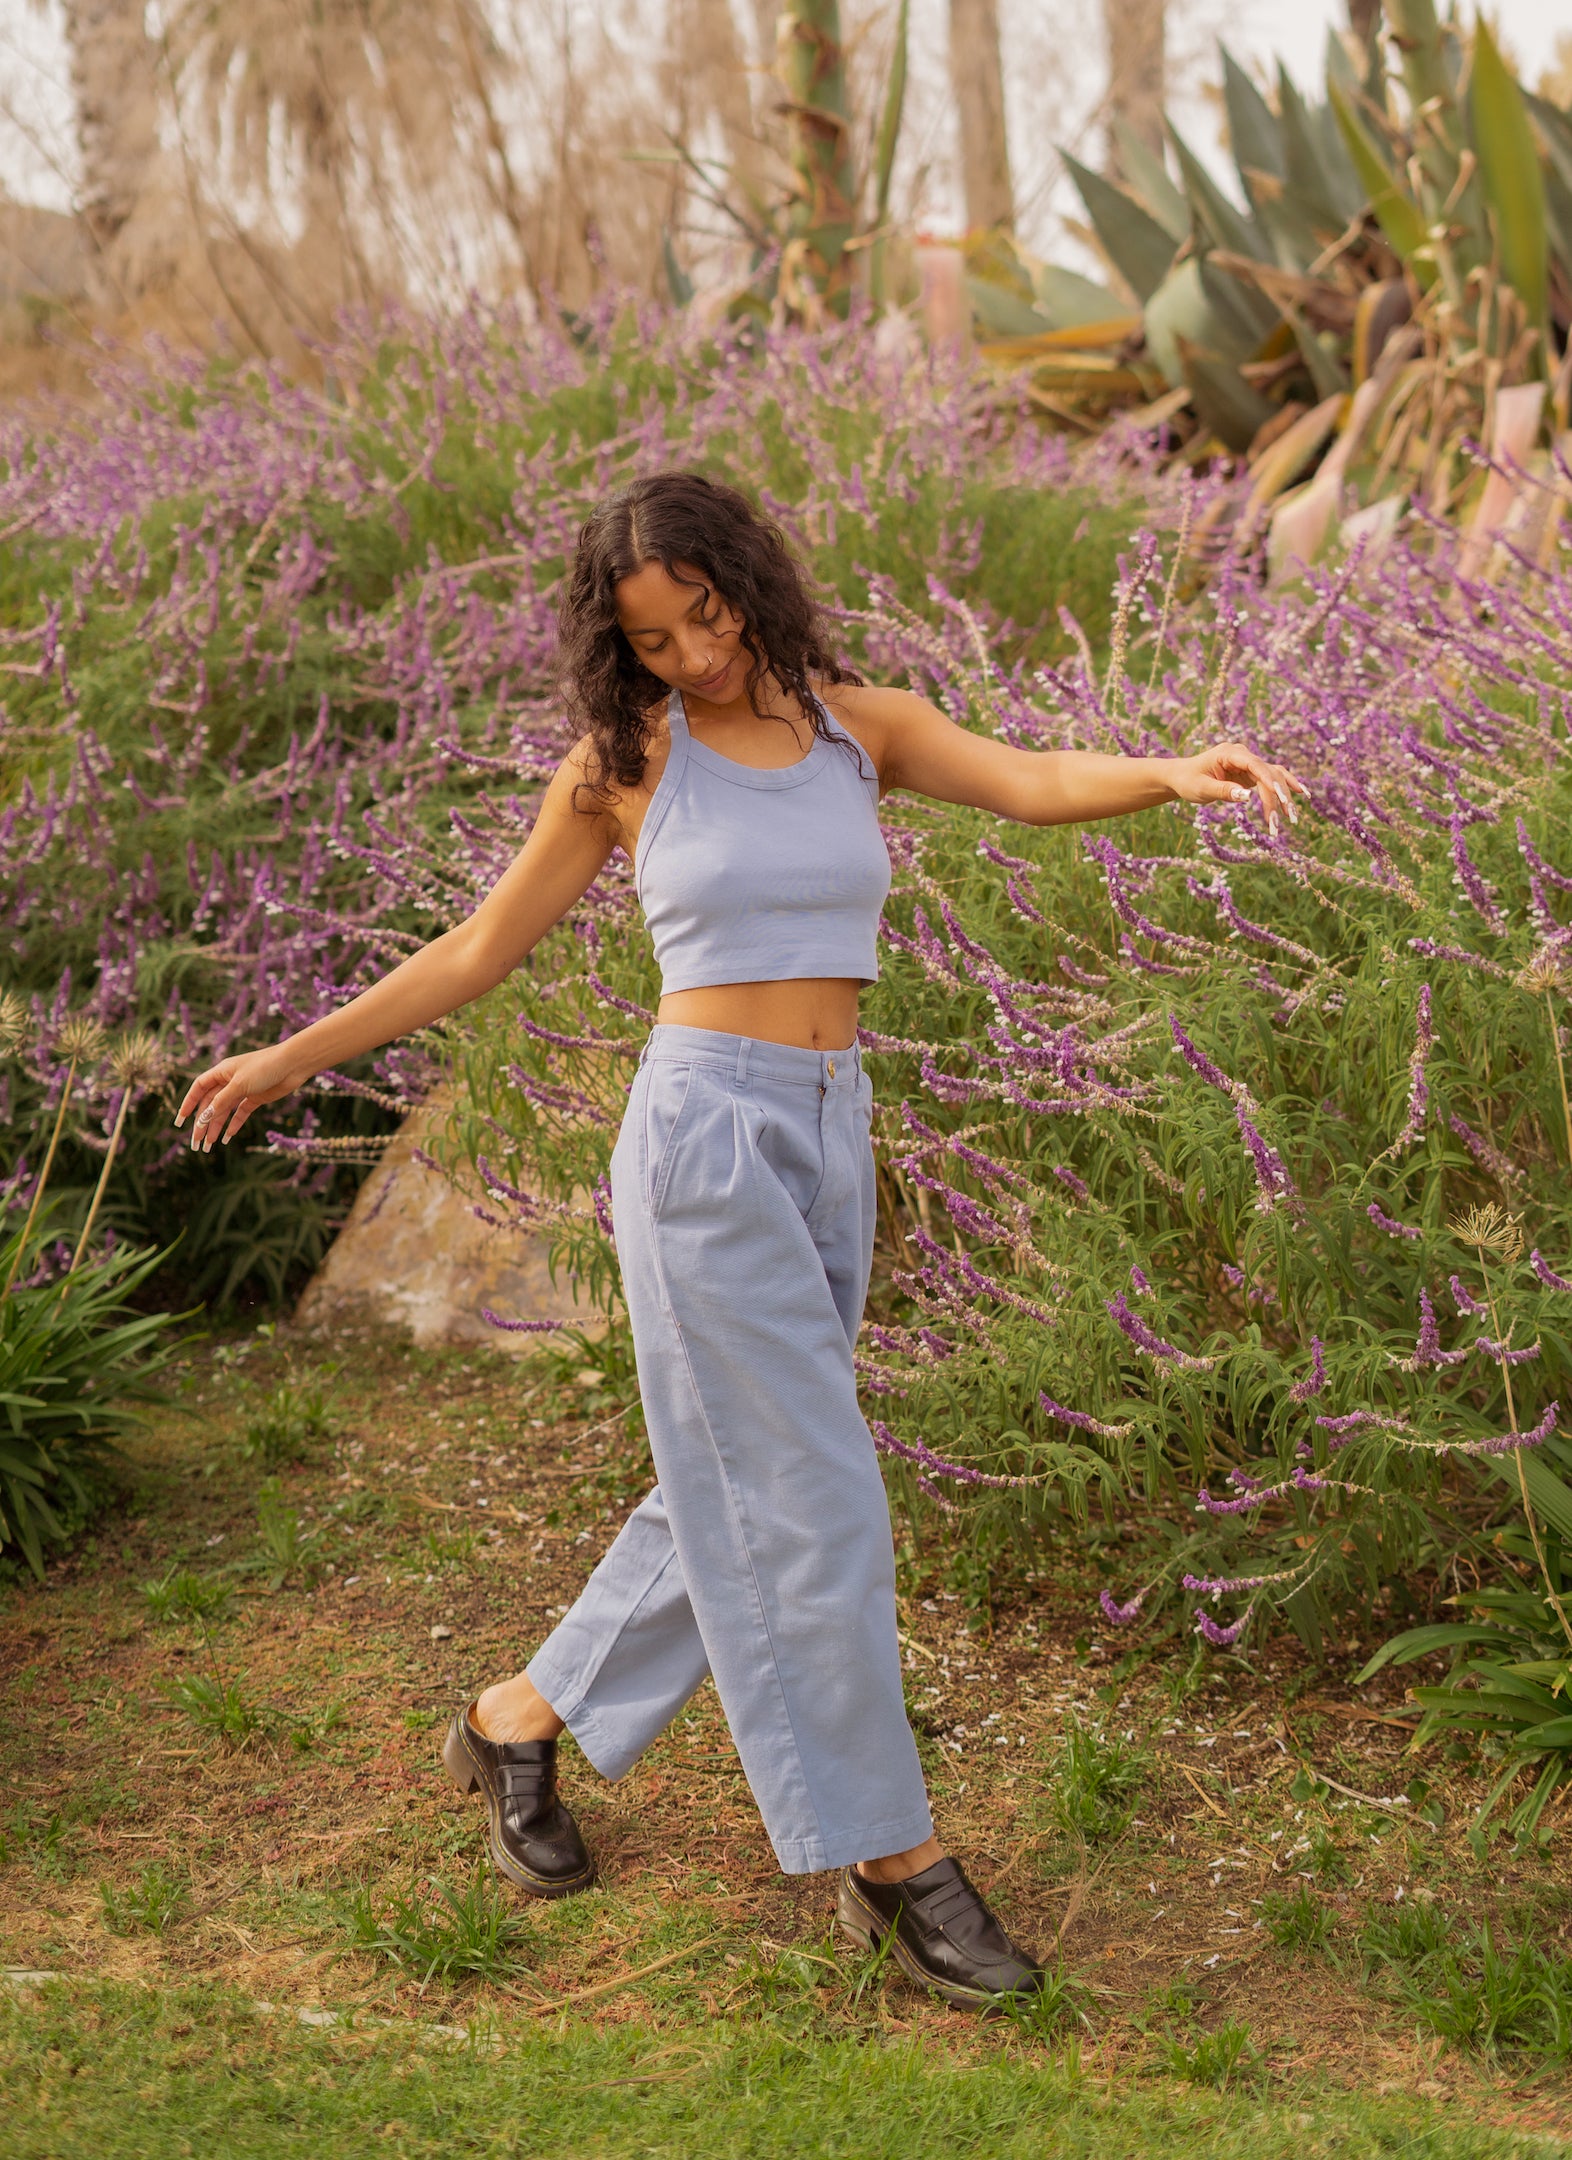 Blair is wearing Halter Top in Periwinkle and Heavyweight Trousers in Periwinkle